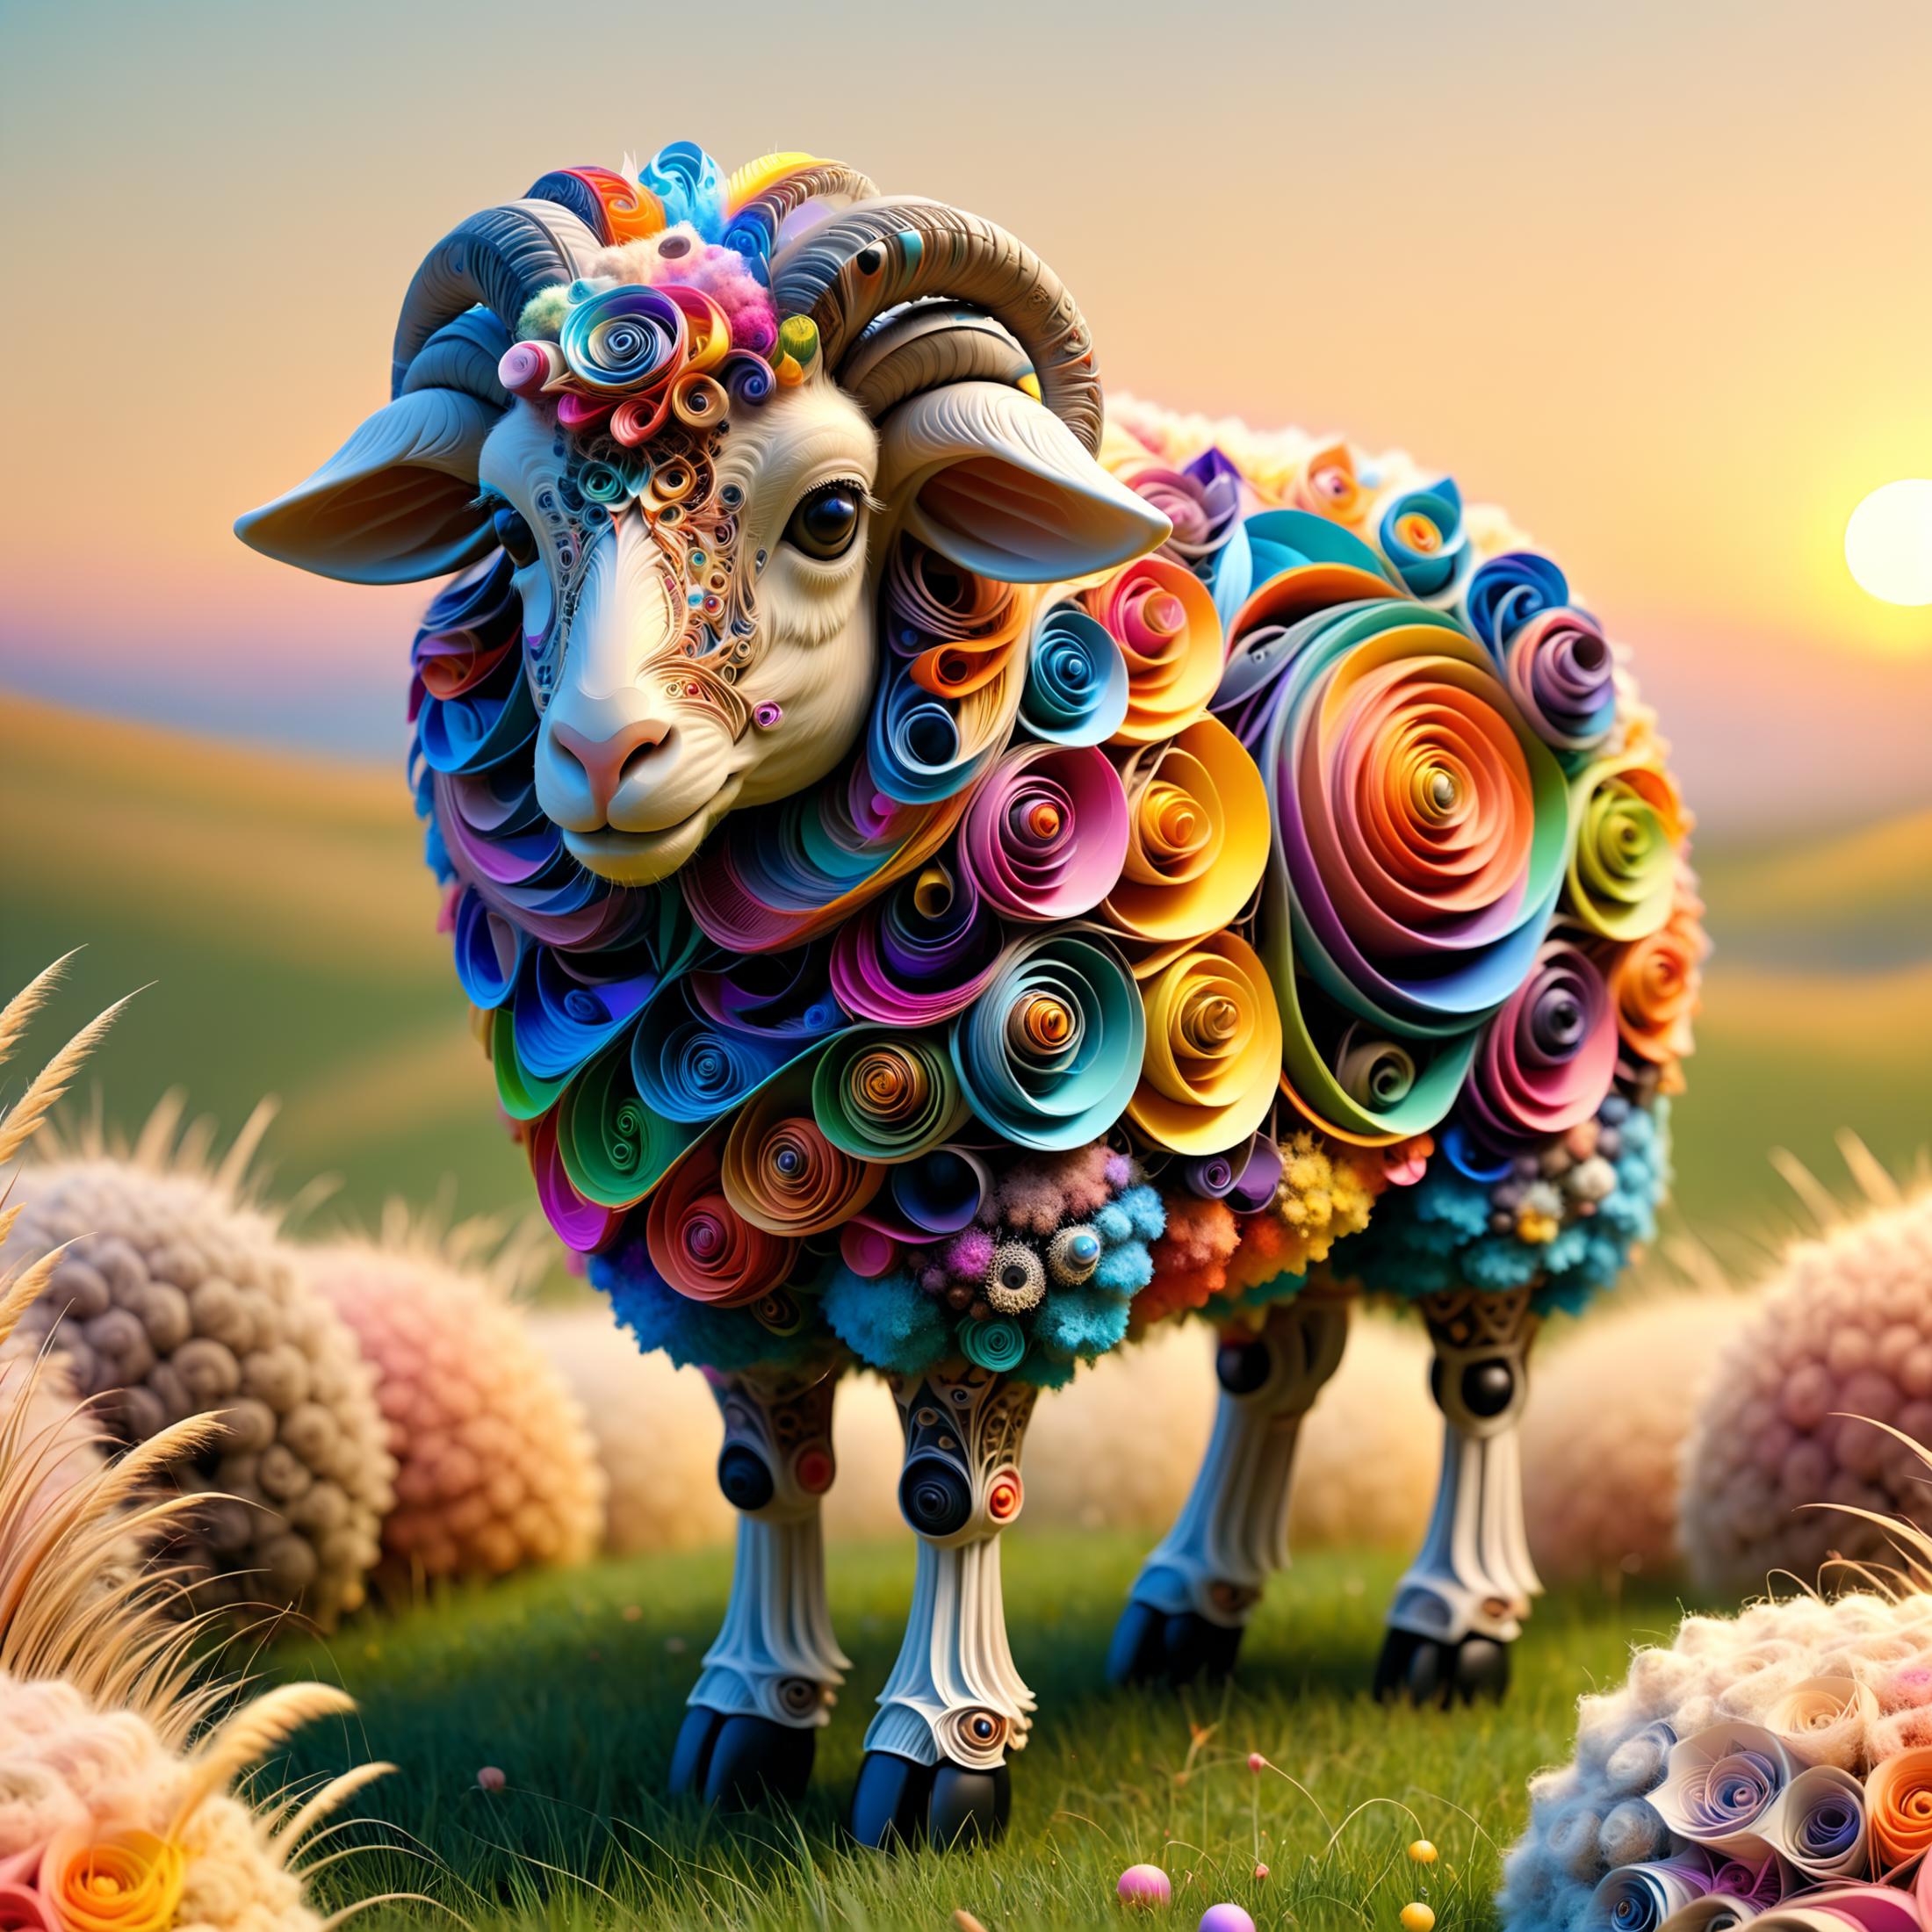 Colorful Ram Statue with Sheep Horns and Flowers on its Head, Standing in a Field.